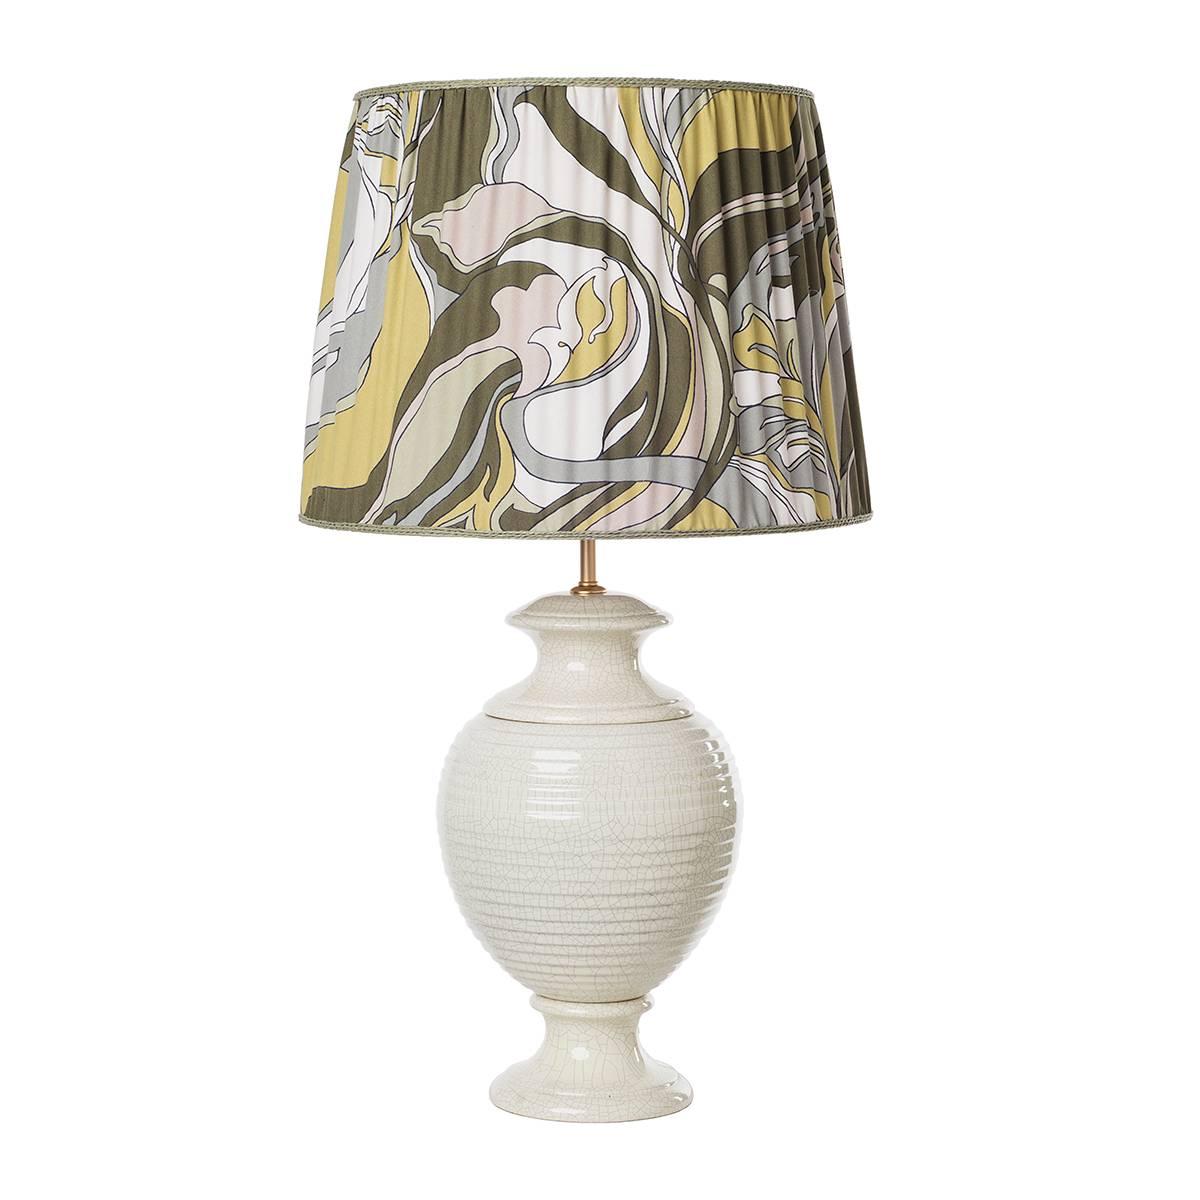 Pair of striped table lamps and shades. The items feature a classical sinuous shape enriched by a crackled ivory glazed surface and completed by a cylindrical pleated shade in a fancy pattern fabric. Wired to your request, 1 x E27/E26 screw bulb.